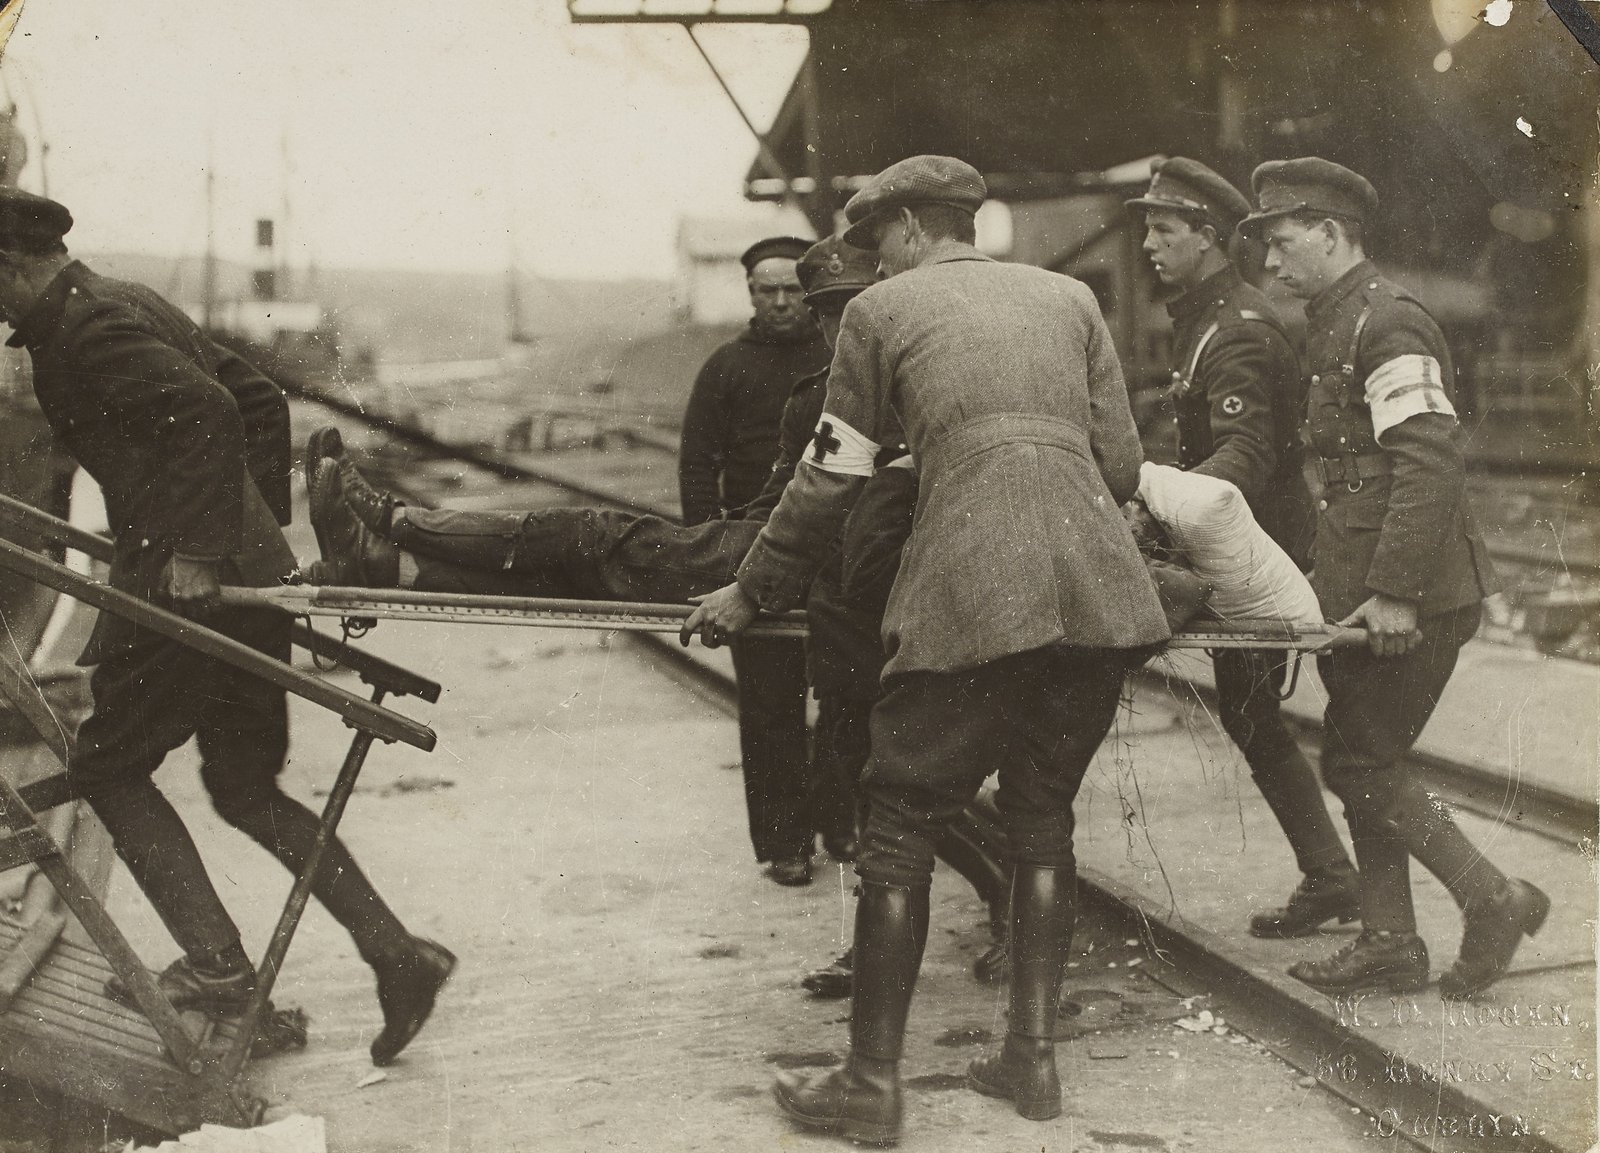 Image - Members of the National Army medical corps taking one of the wounded back to the Lady Wicklow which formed the base hospital until the troops had advanced from Passage West to Cork City. Image courtesy of the National Library of Ireland